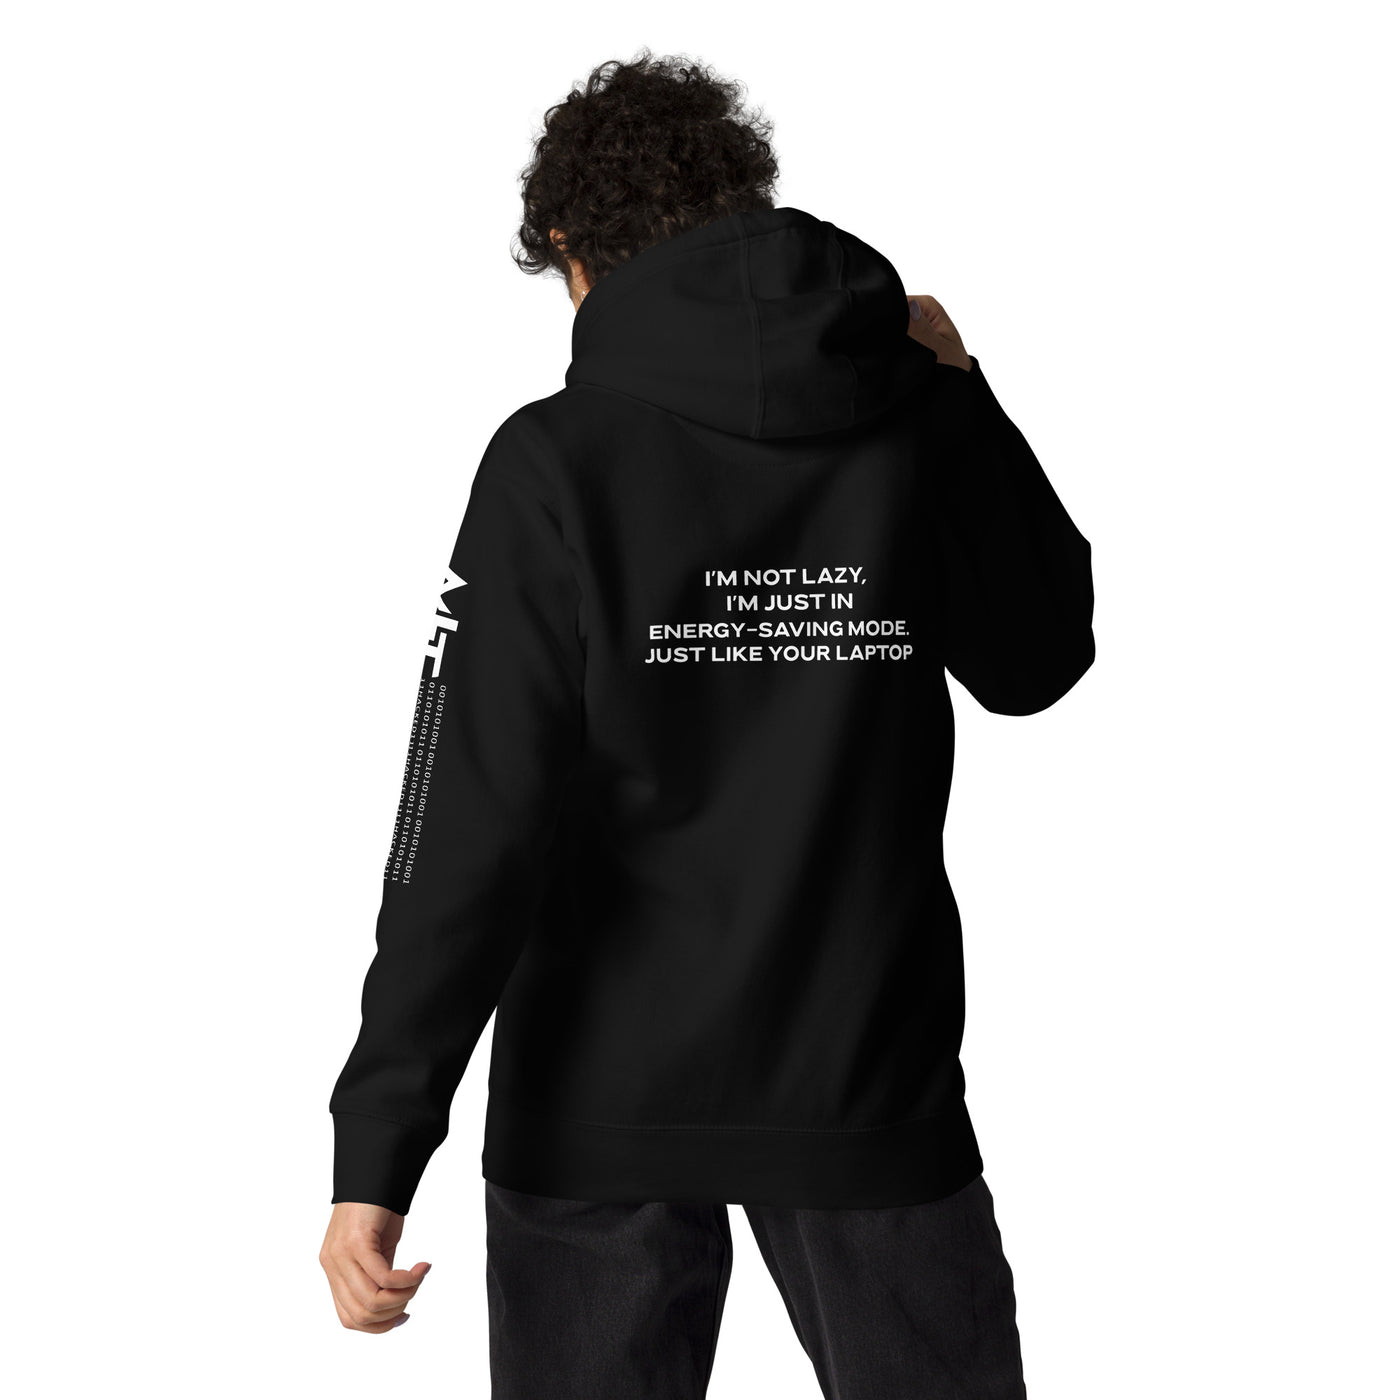 I am not lazy, I am in Energy-Saving Mode, Just like your laptop V2 - Unisex Hoodie ( Back Print )